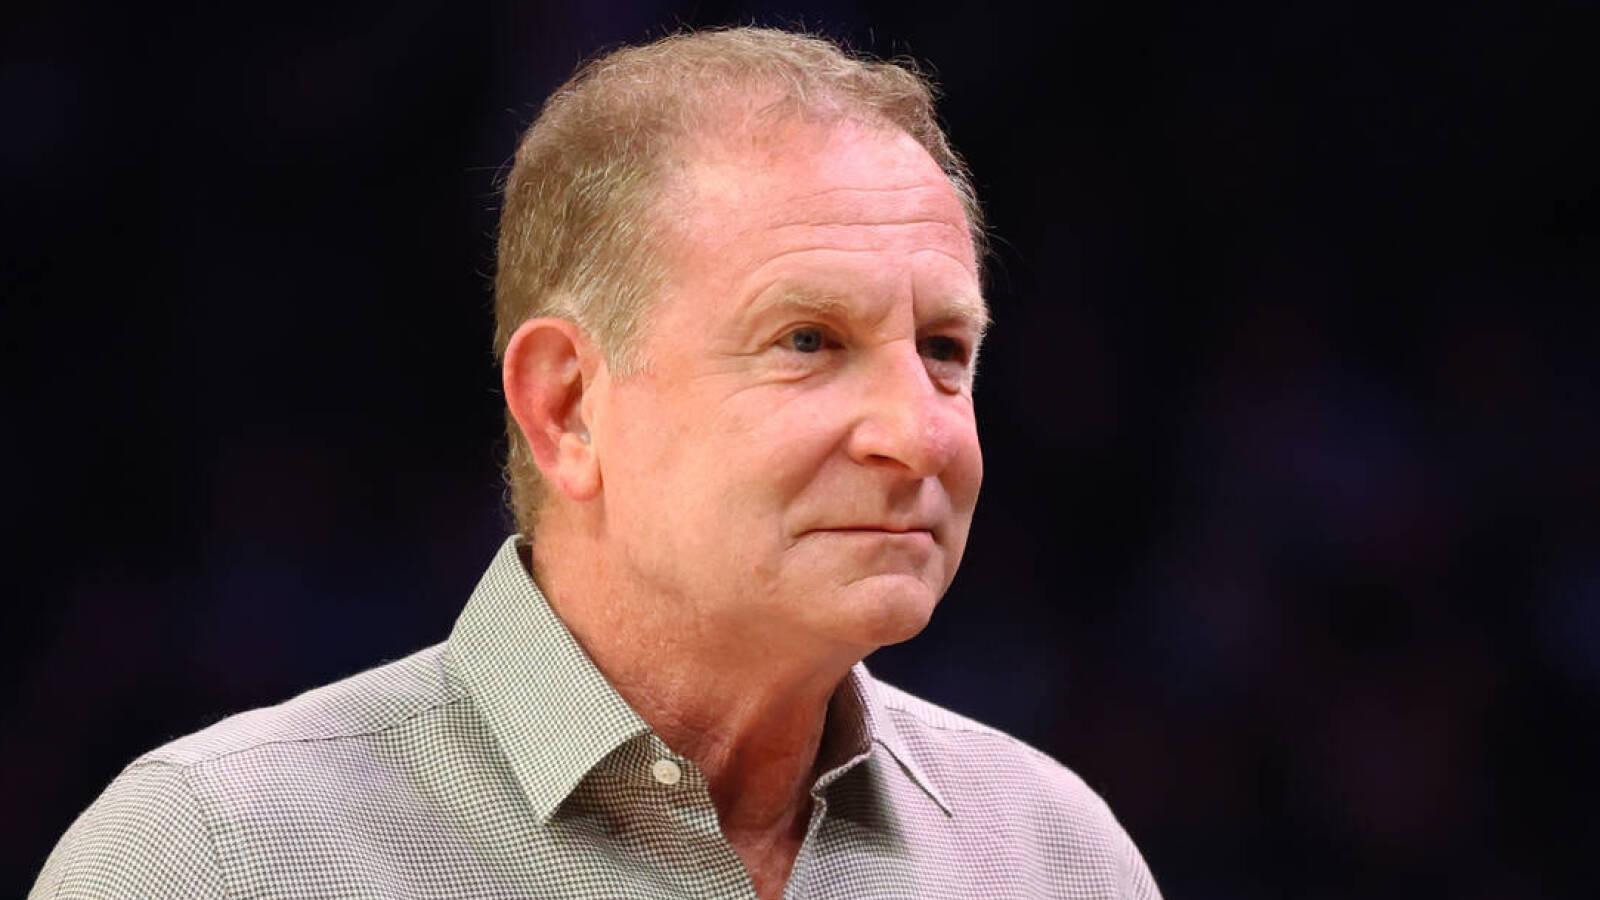 Robert Sarver is selling the Suns and Mercury